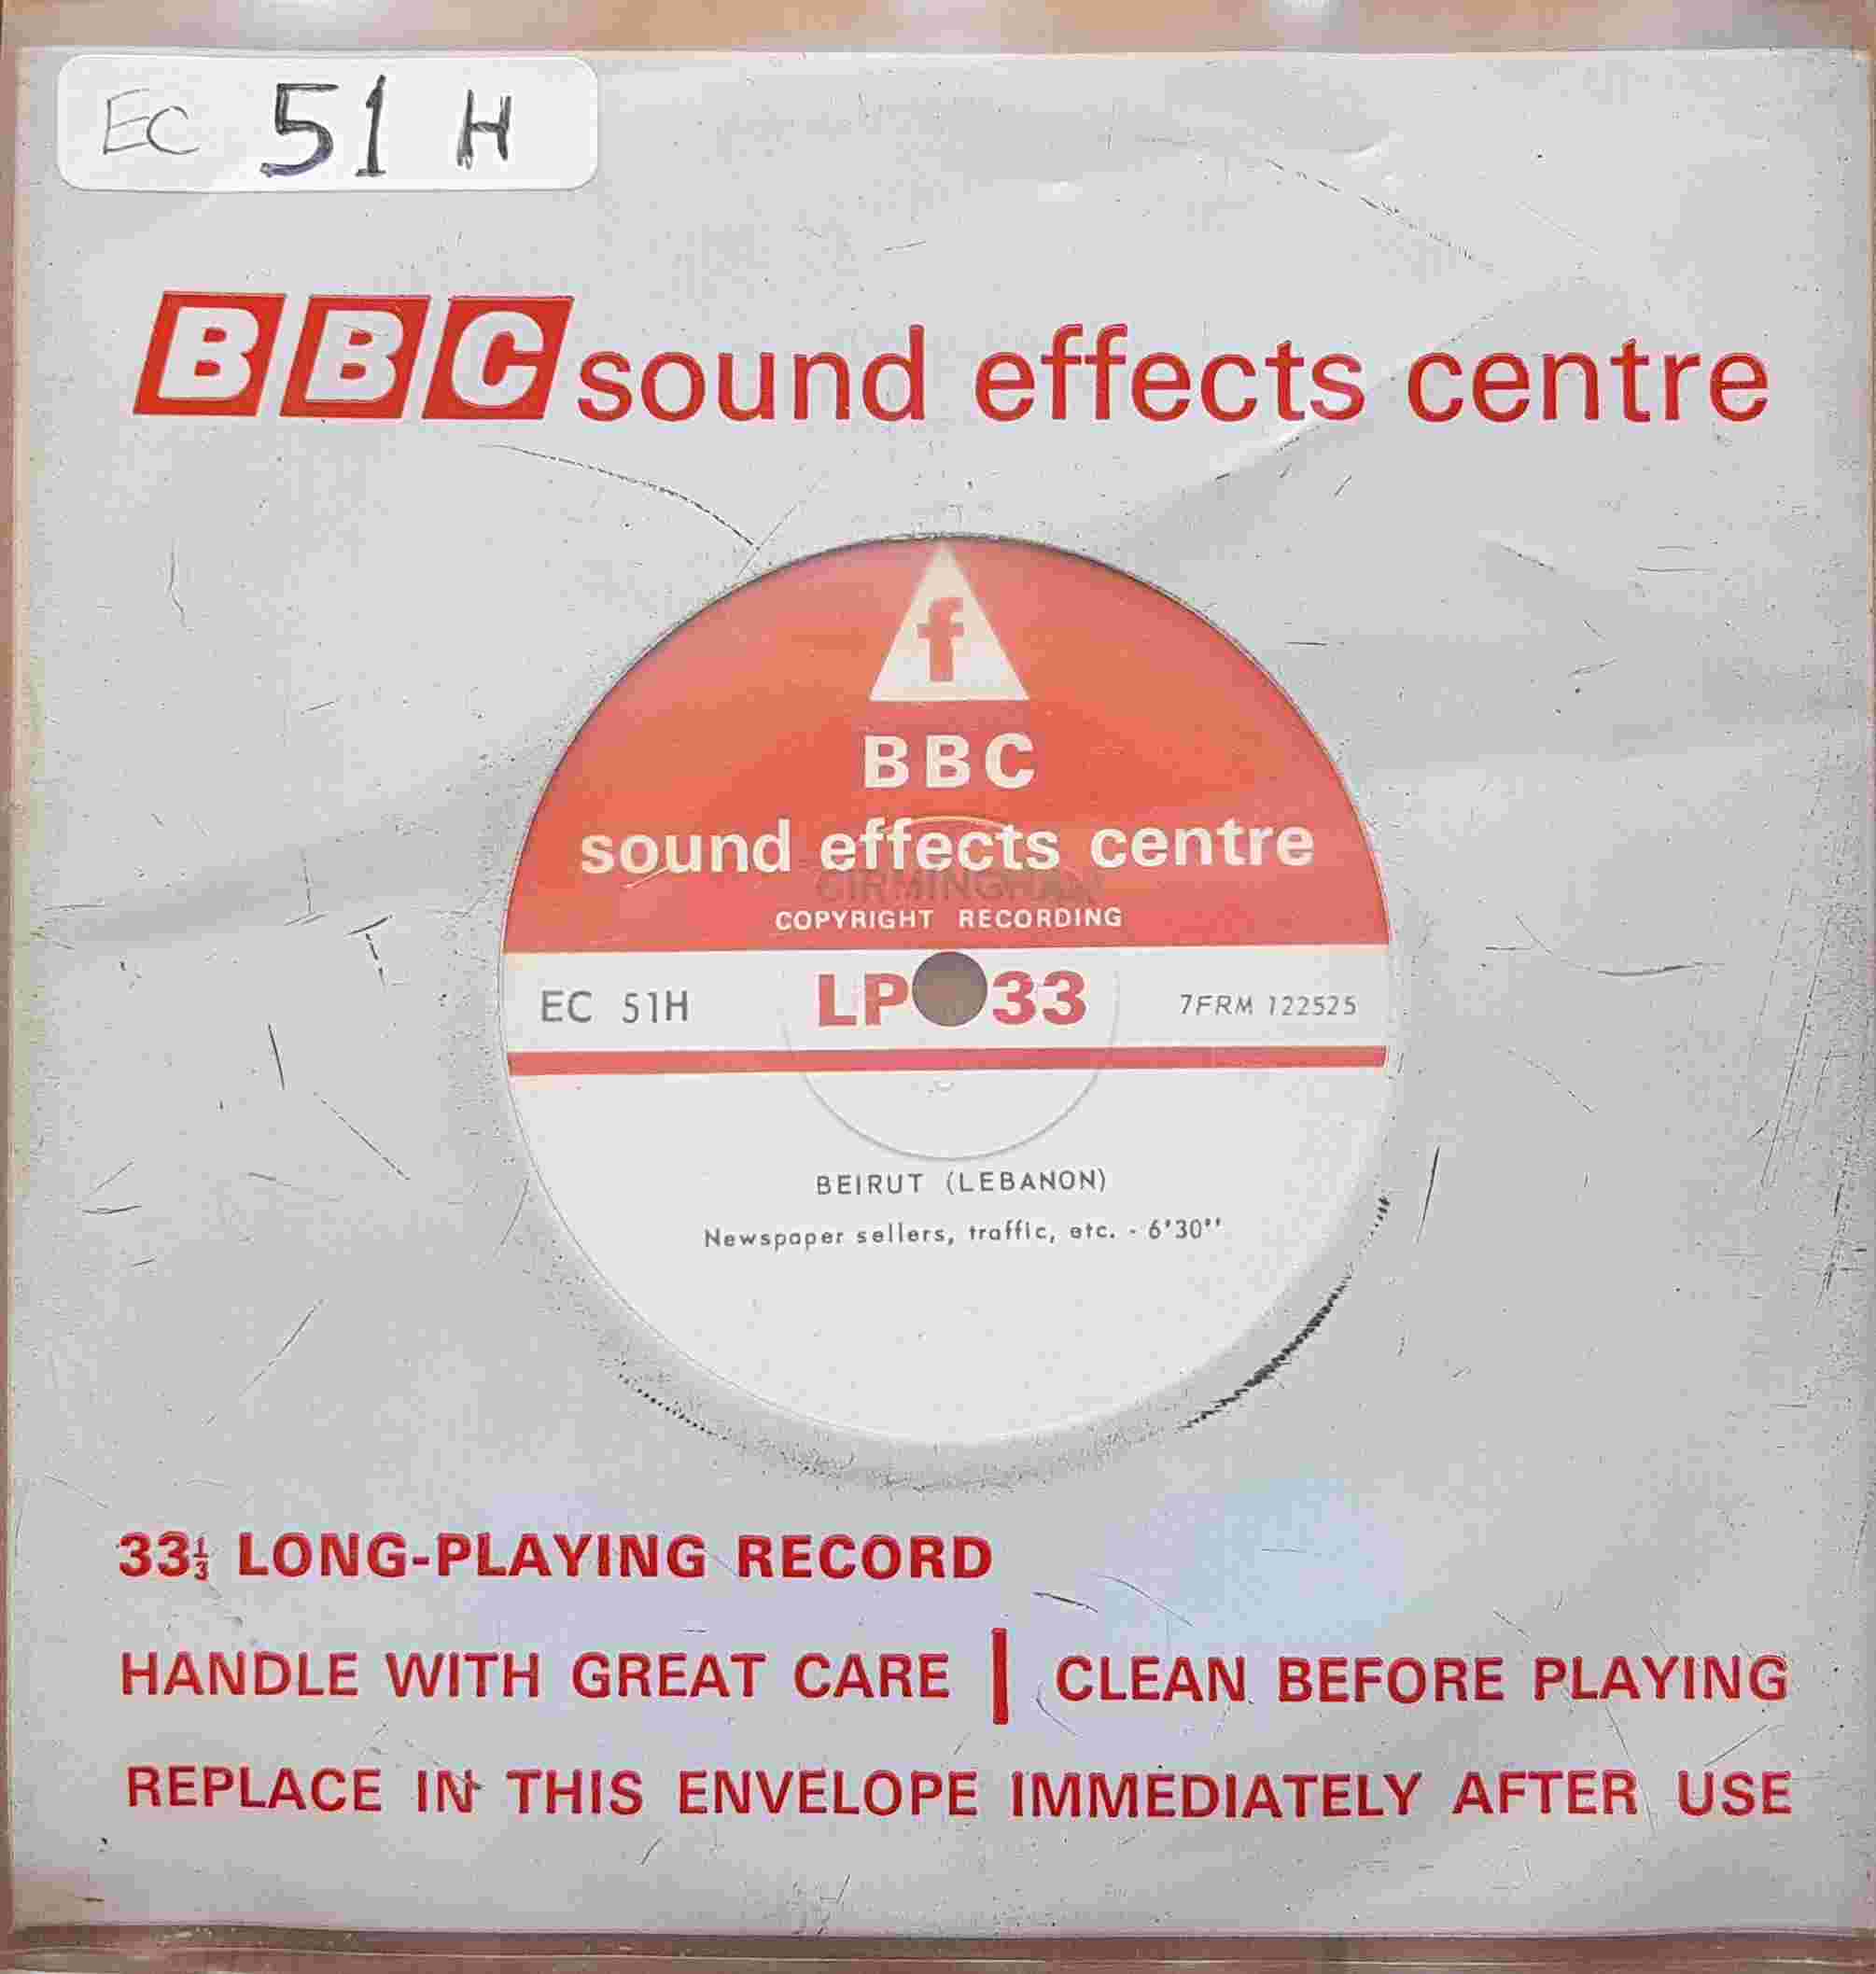 Picture of EC 51H Beirut (Lebanon) single by artist Not registered from the BBC records and Tapes library